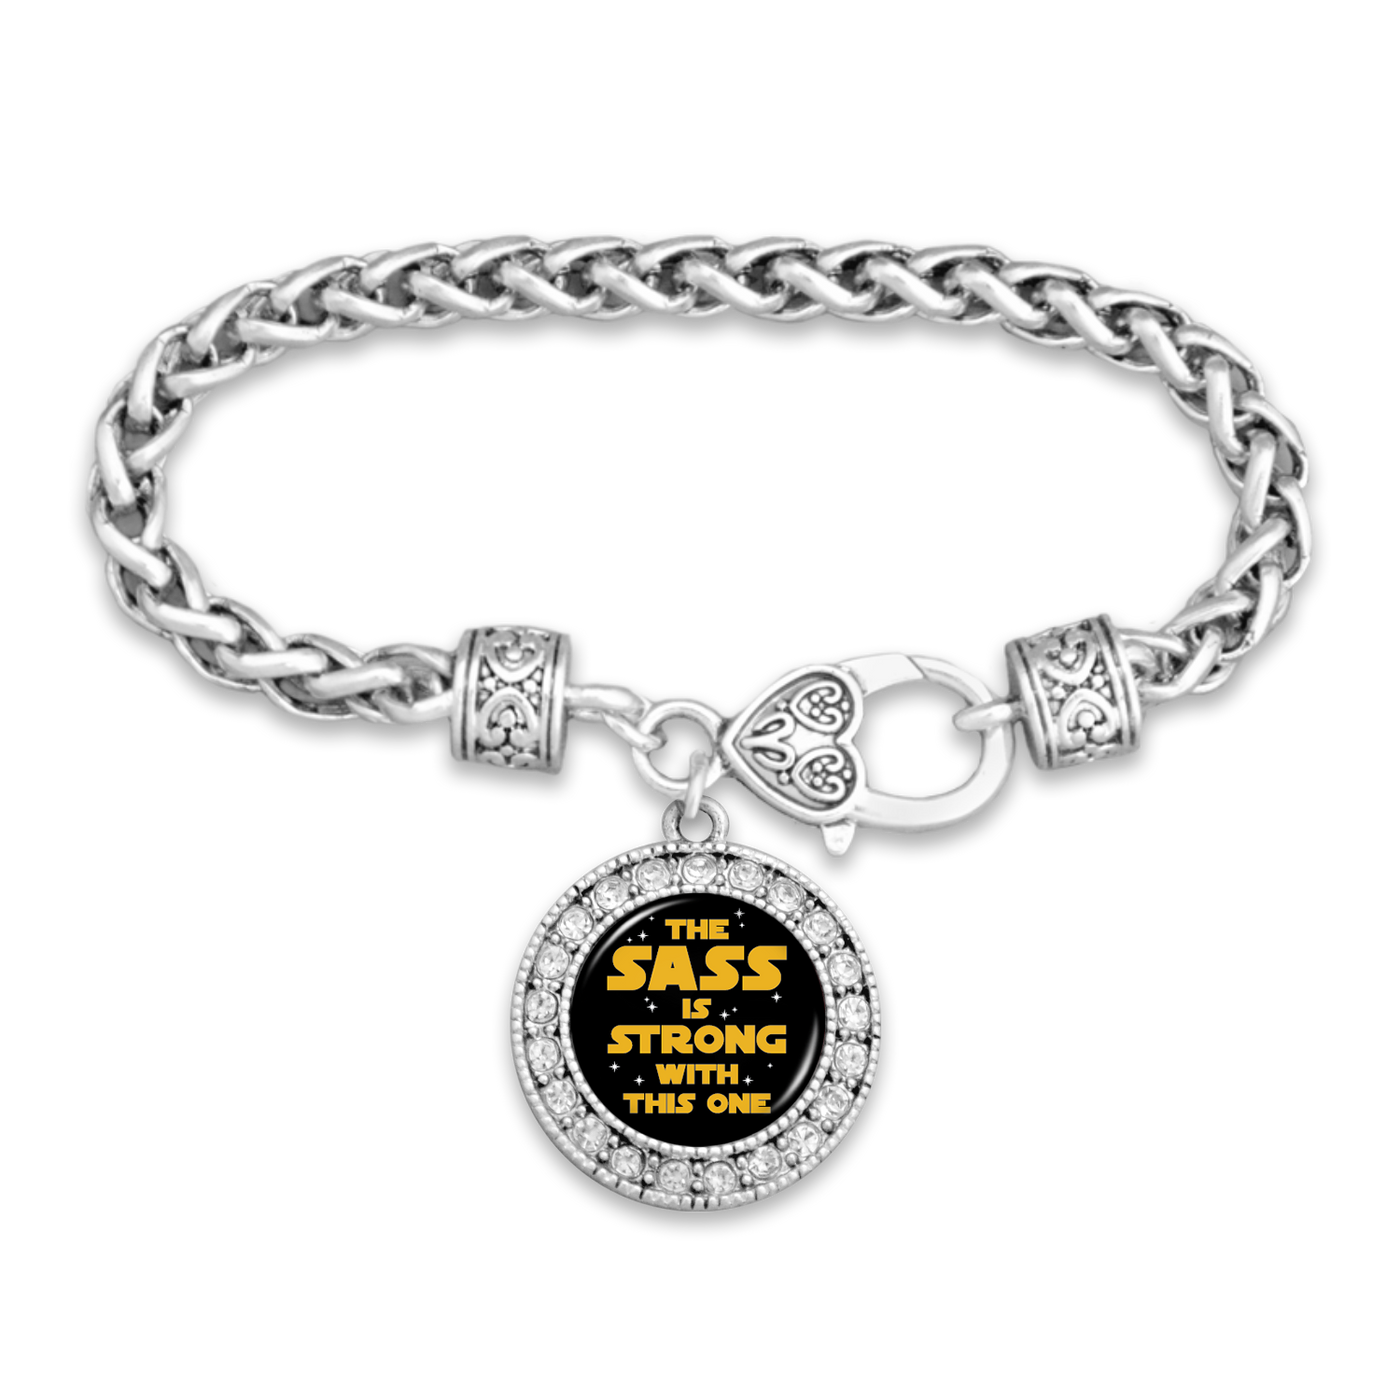 The Sass Is Strong With This One Clasp Bracelet